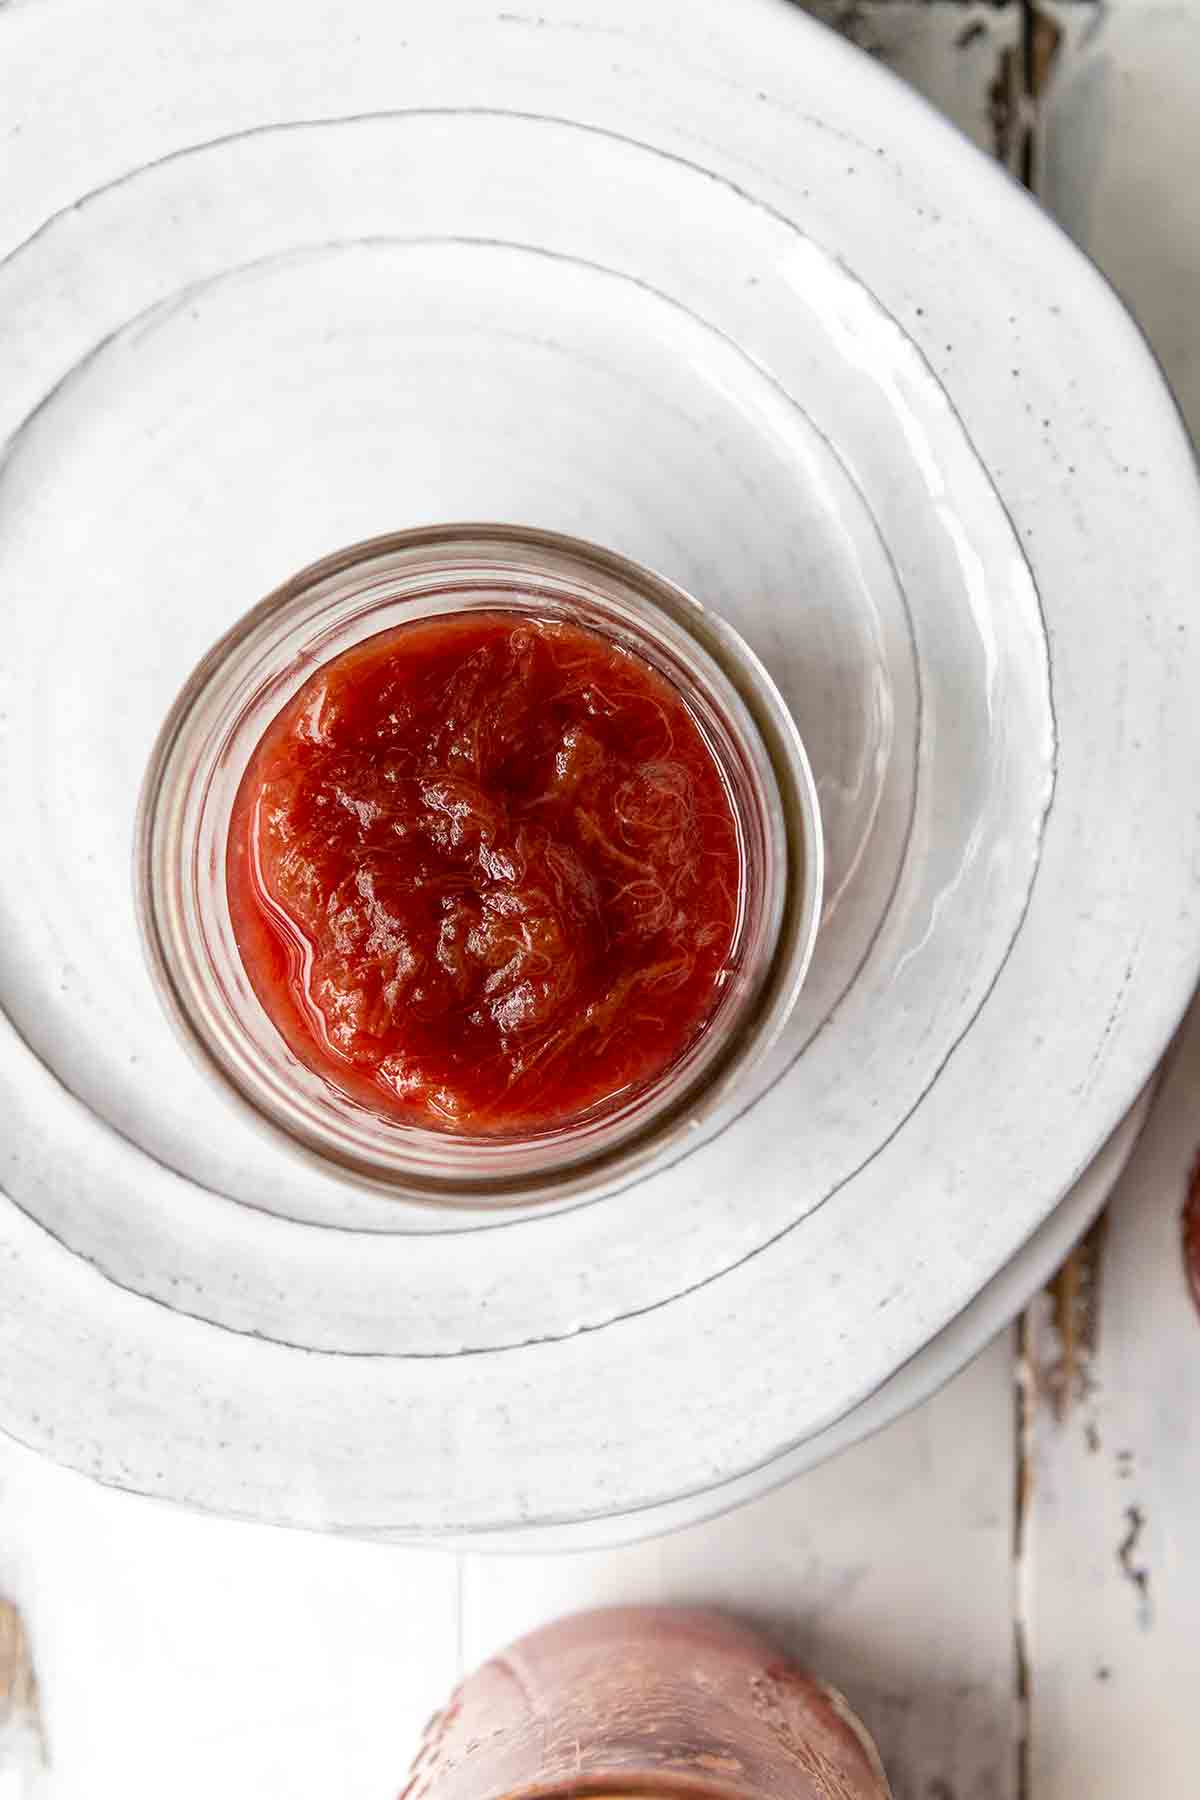 An overhead view of a jar of rhubarb jam on a white plate.